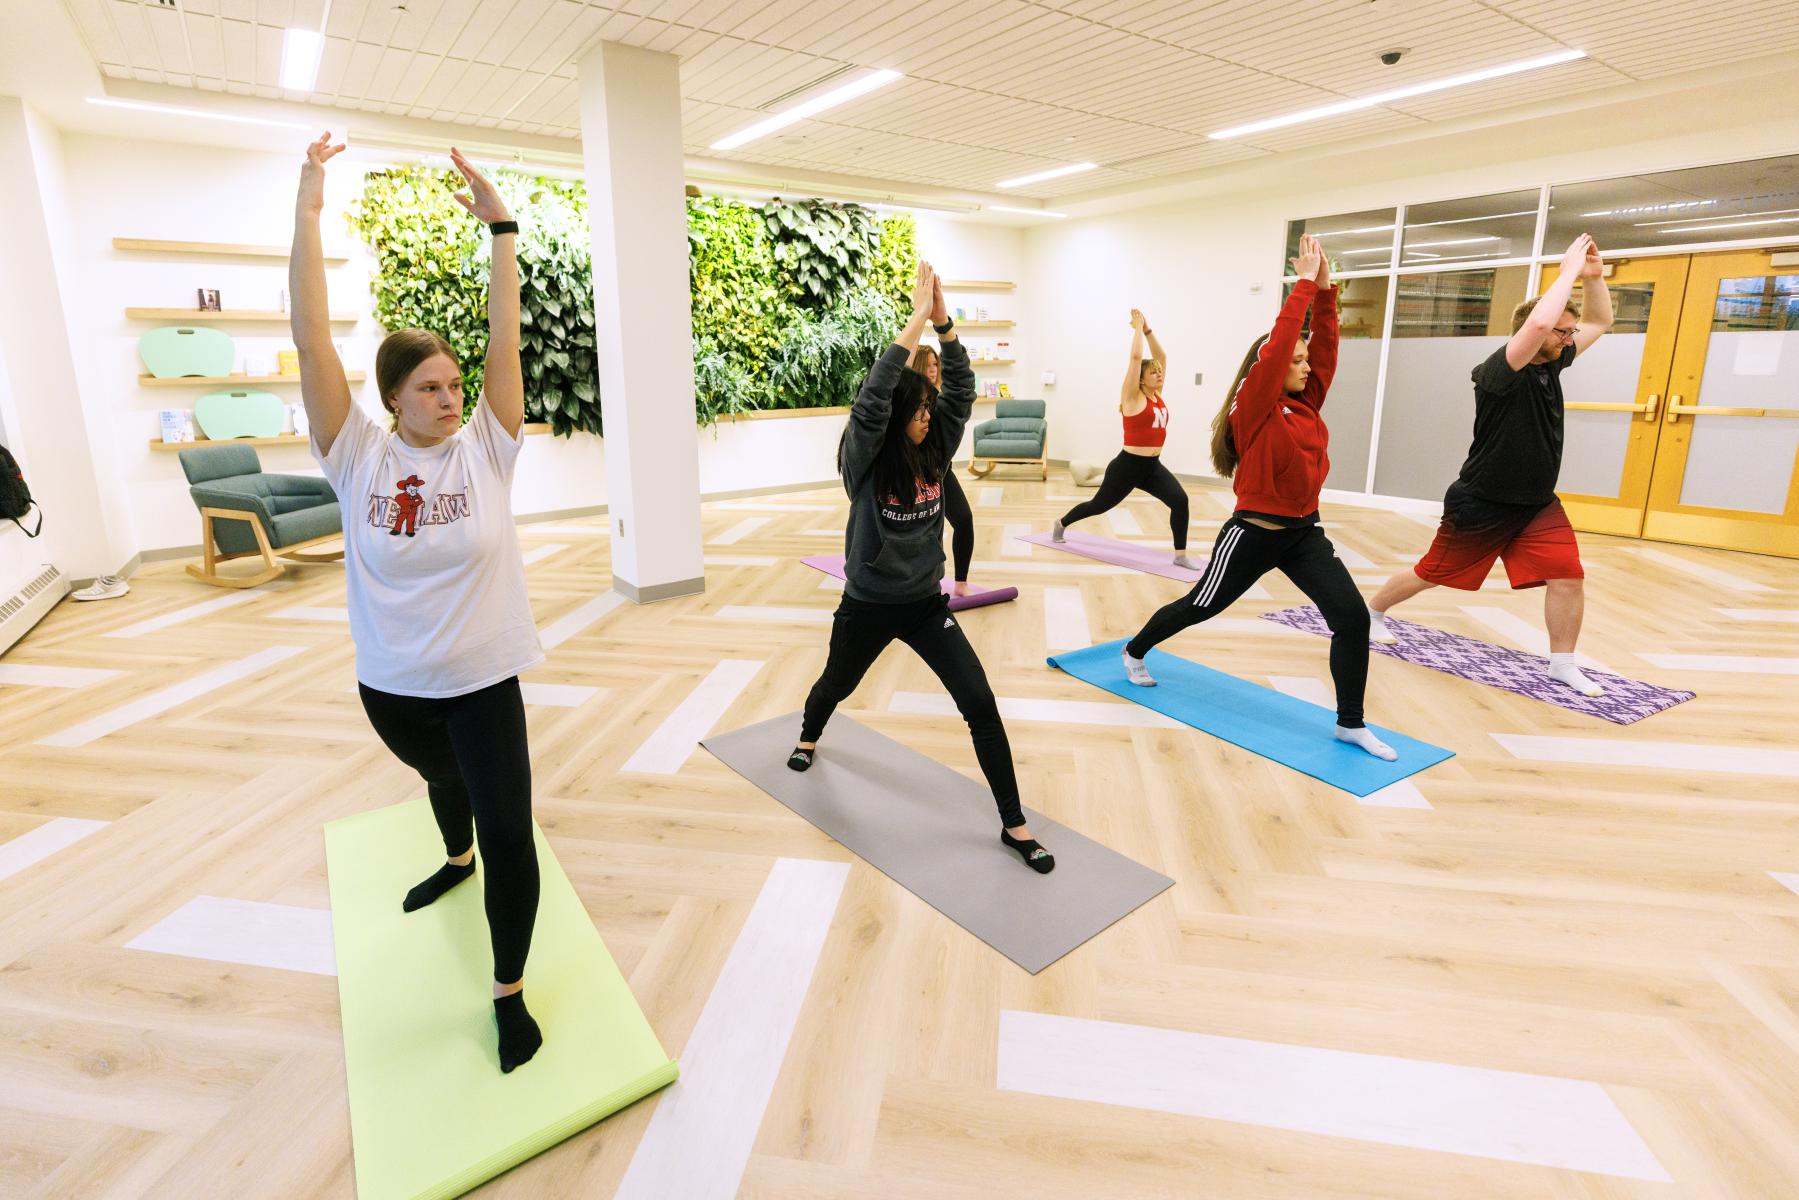 Students do yoga in the wellness room at the College of Law